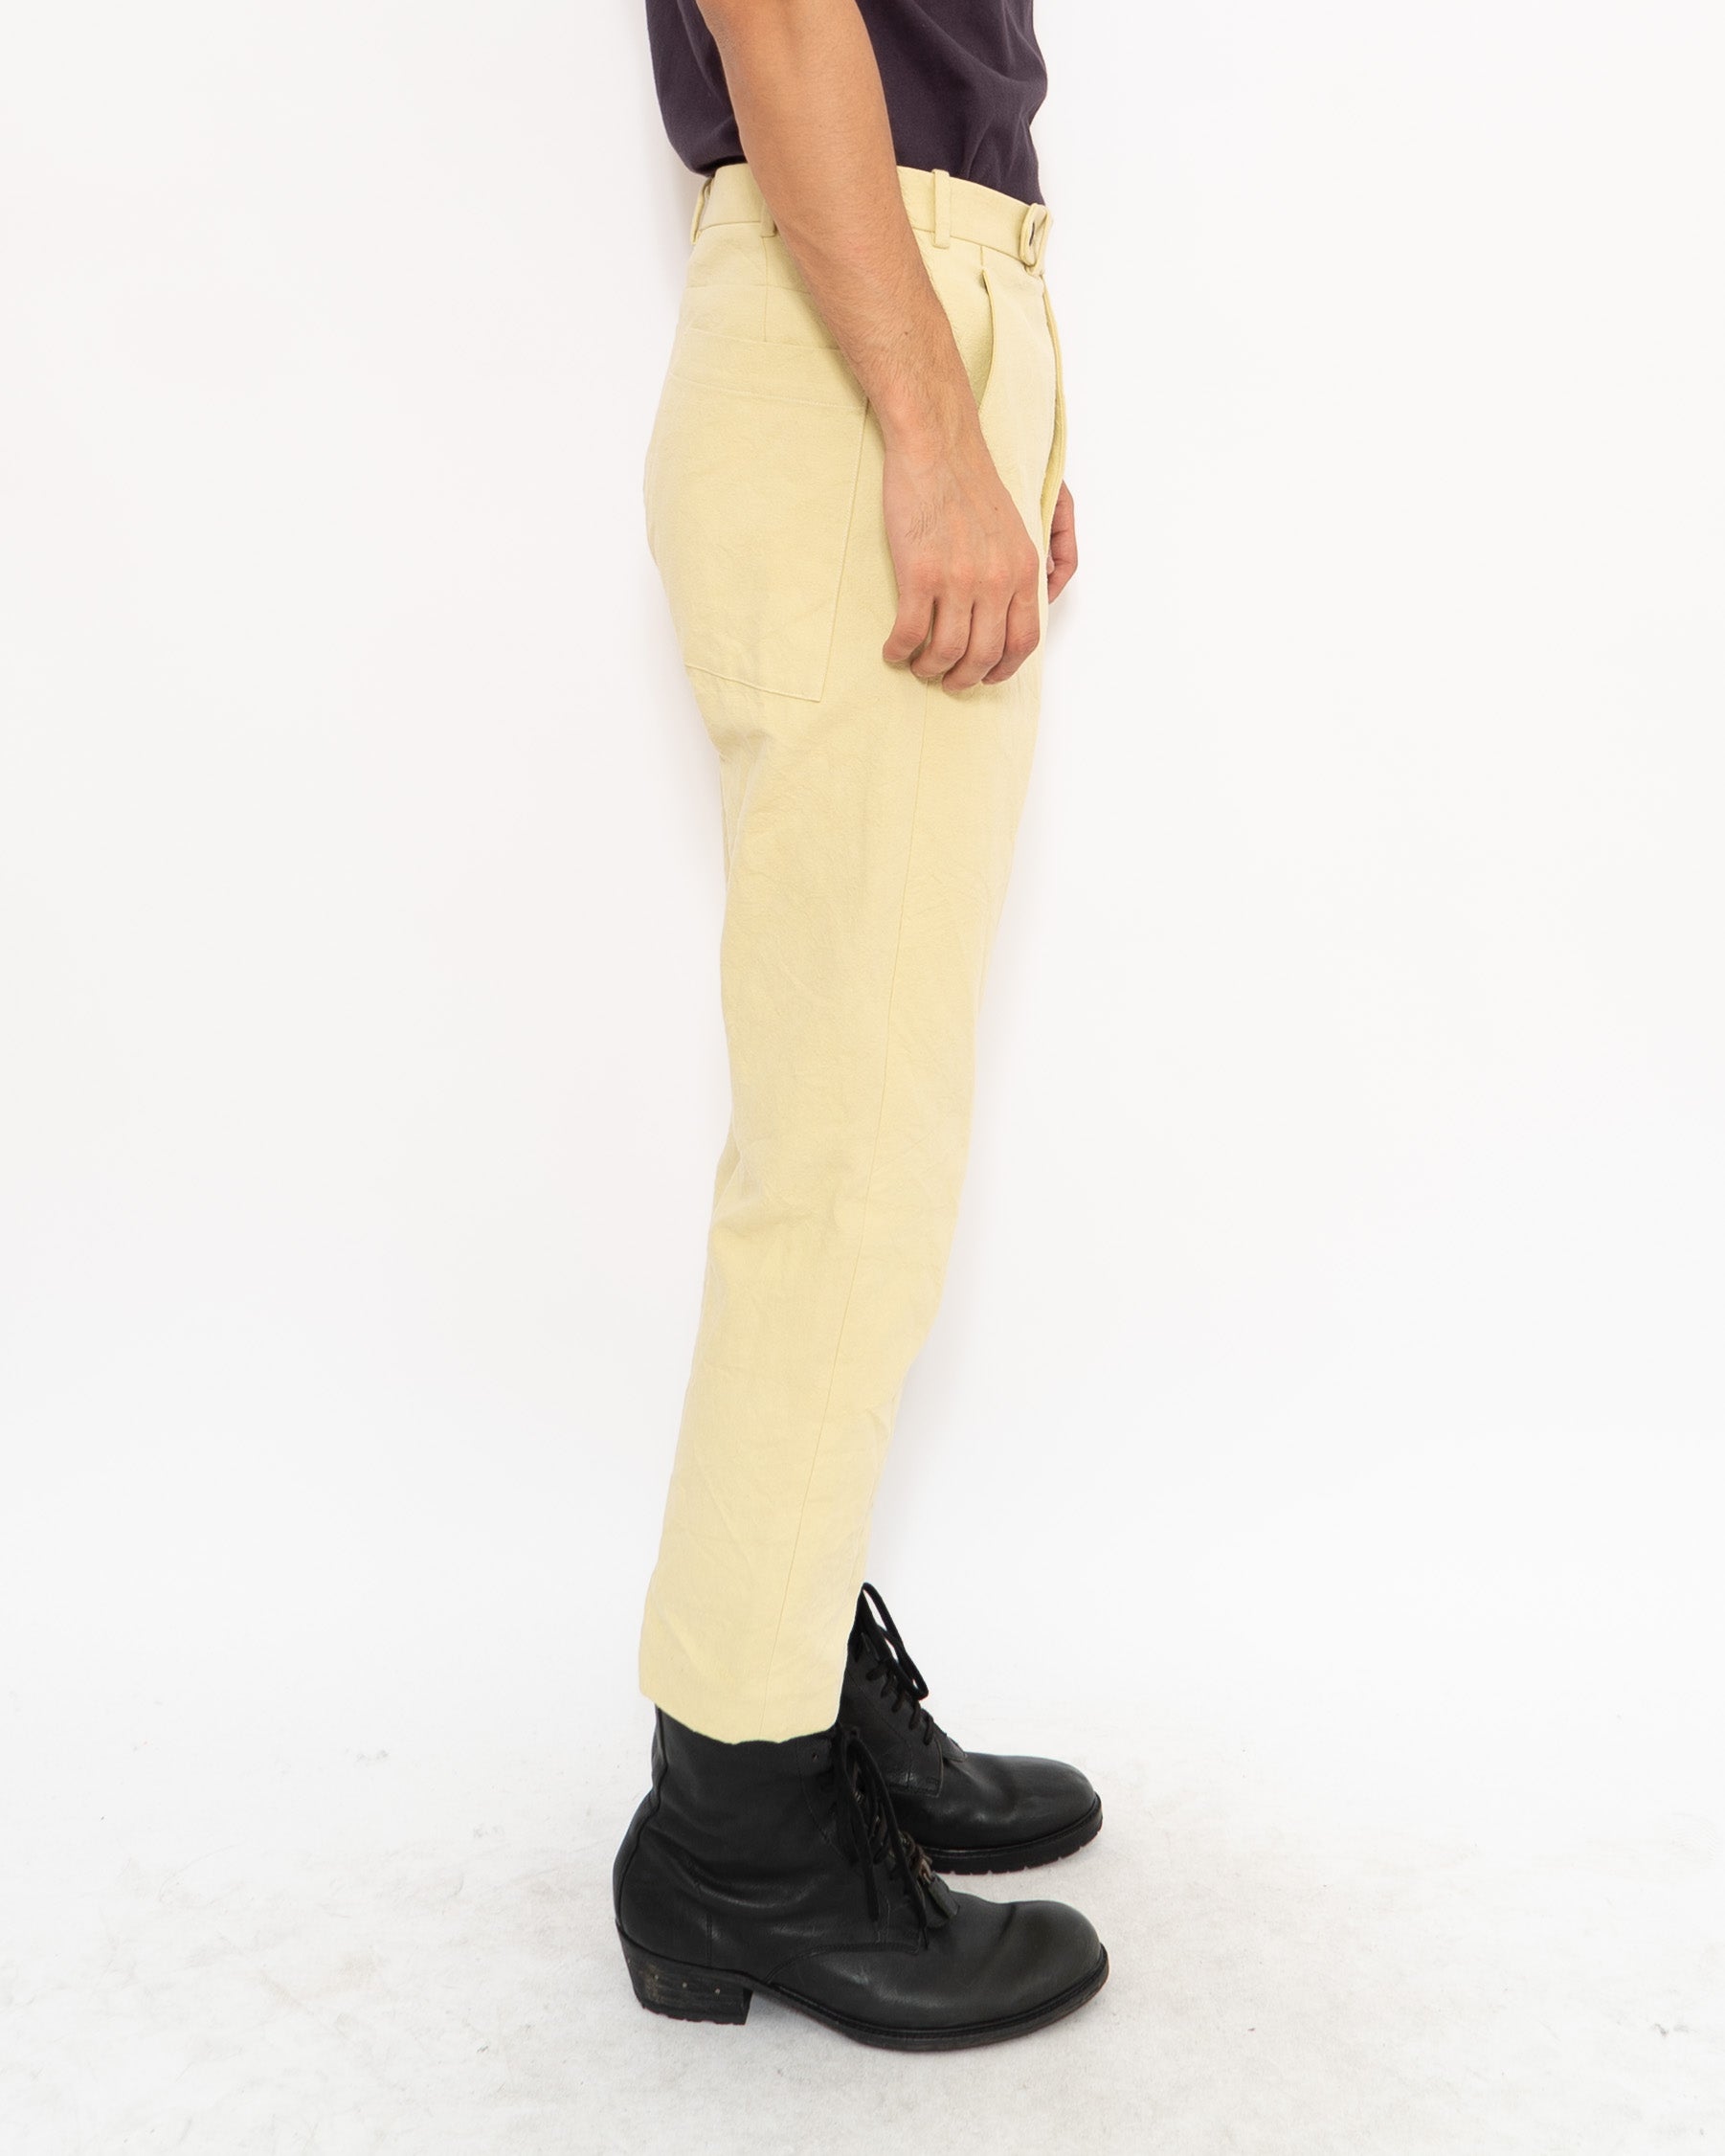 FW19 Crystall Yellow Low Crotch Trousers Sample